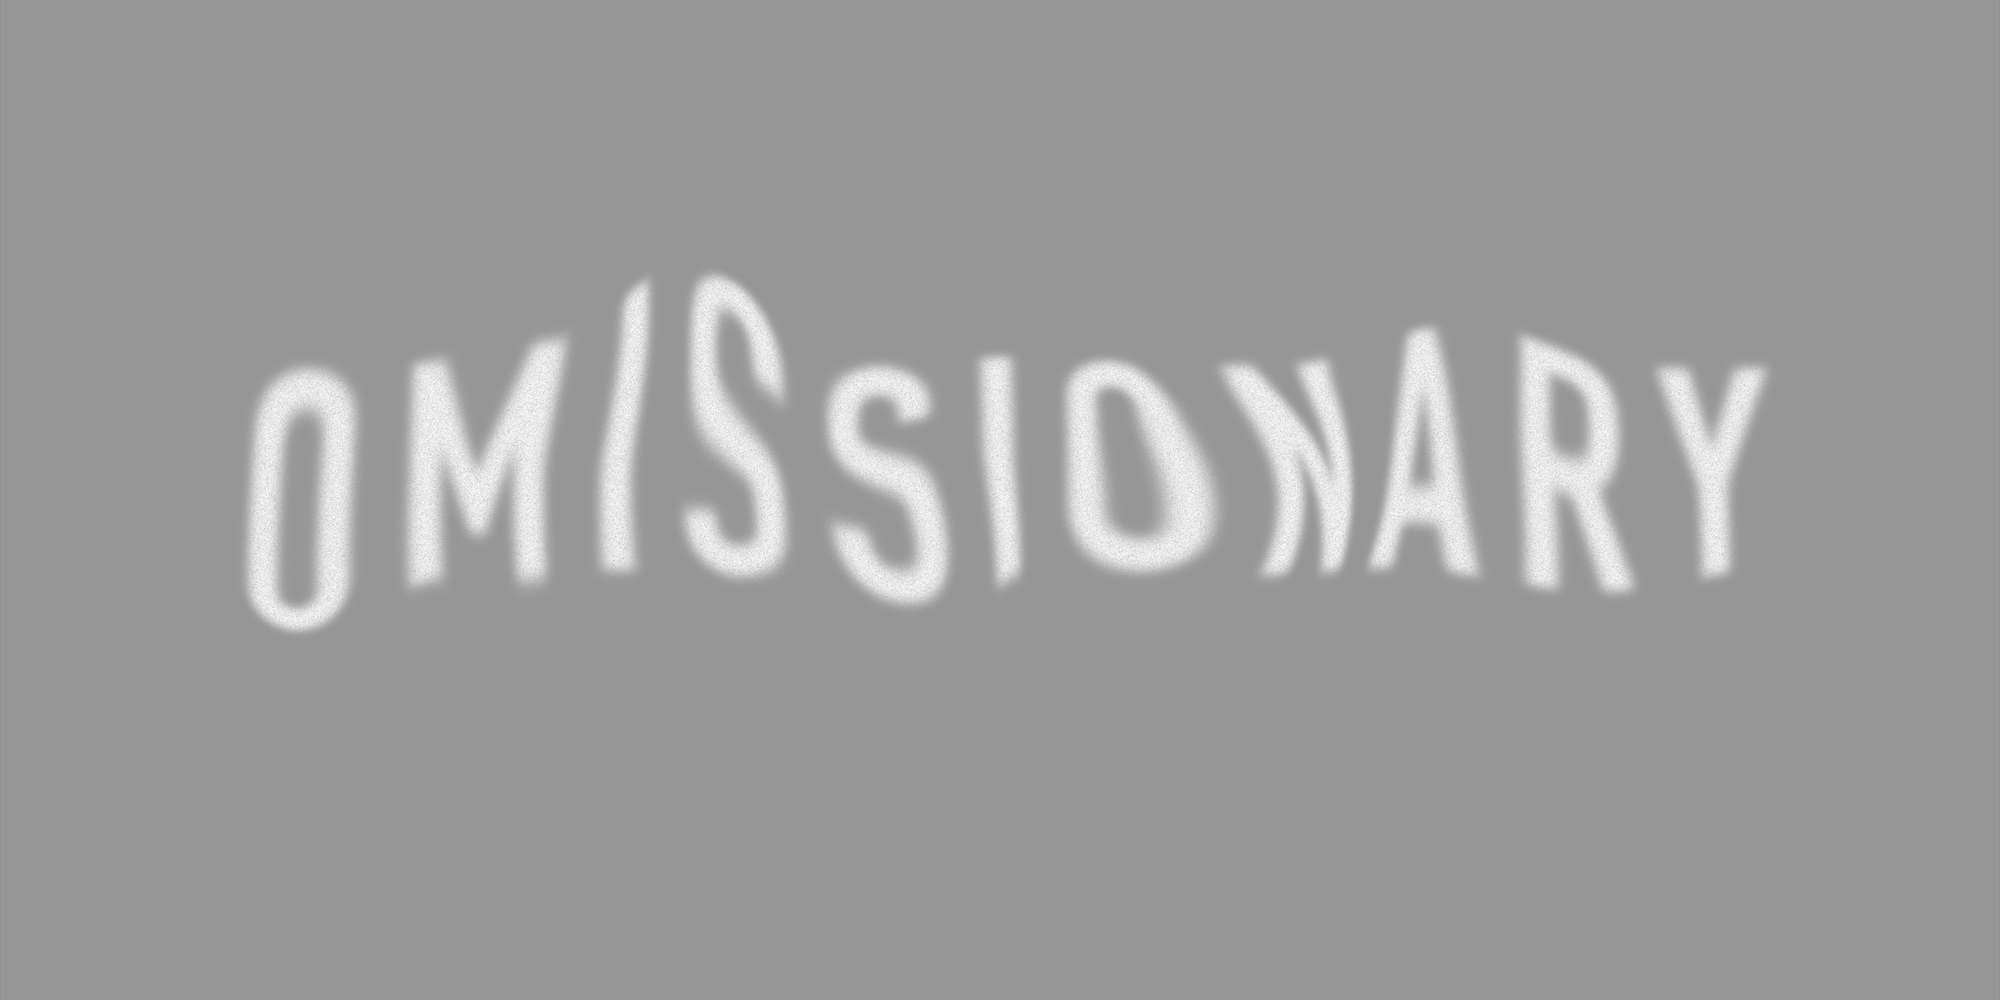 Omissionary